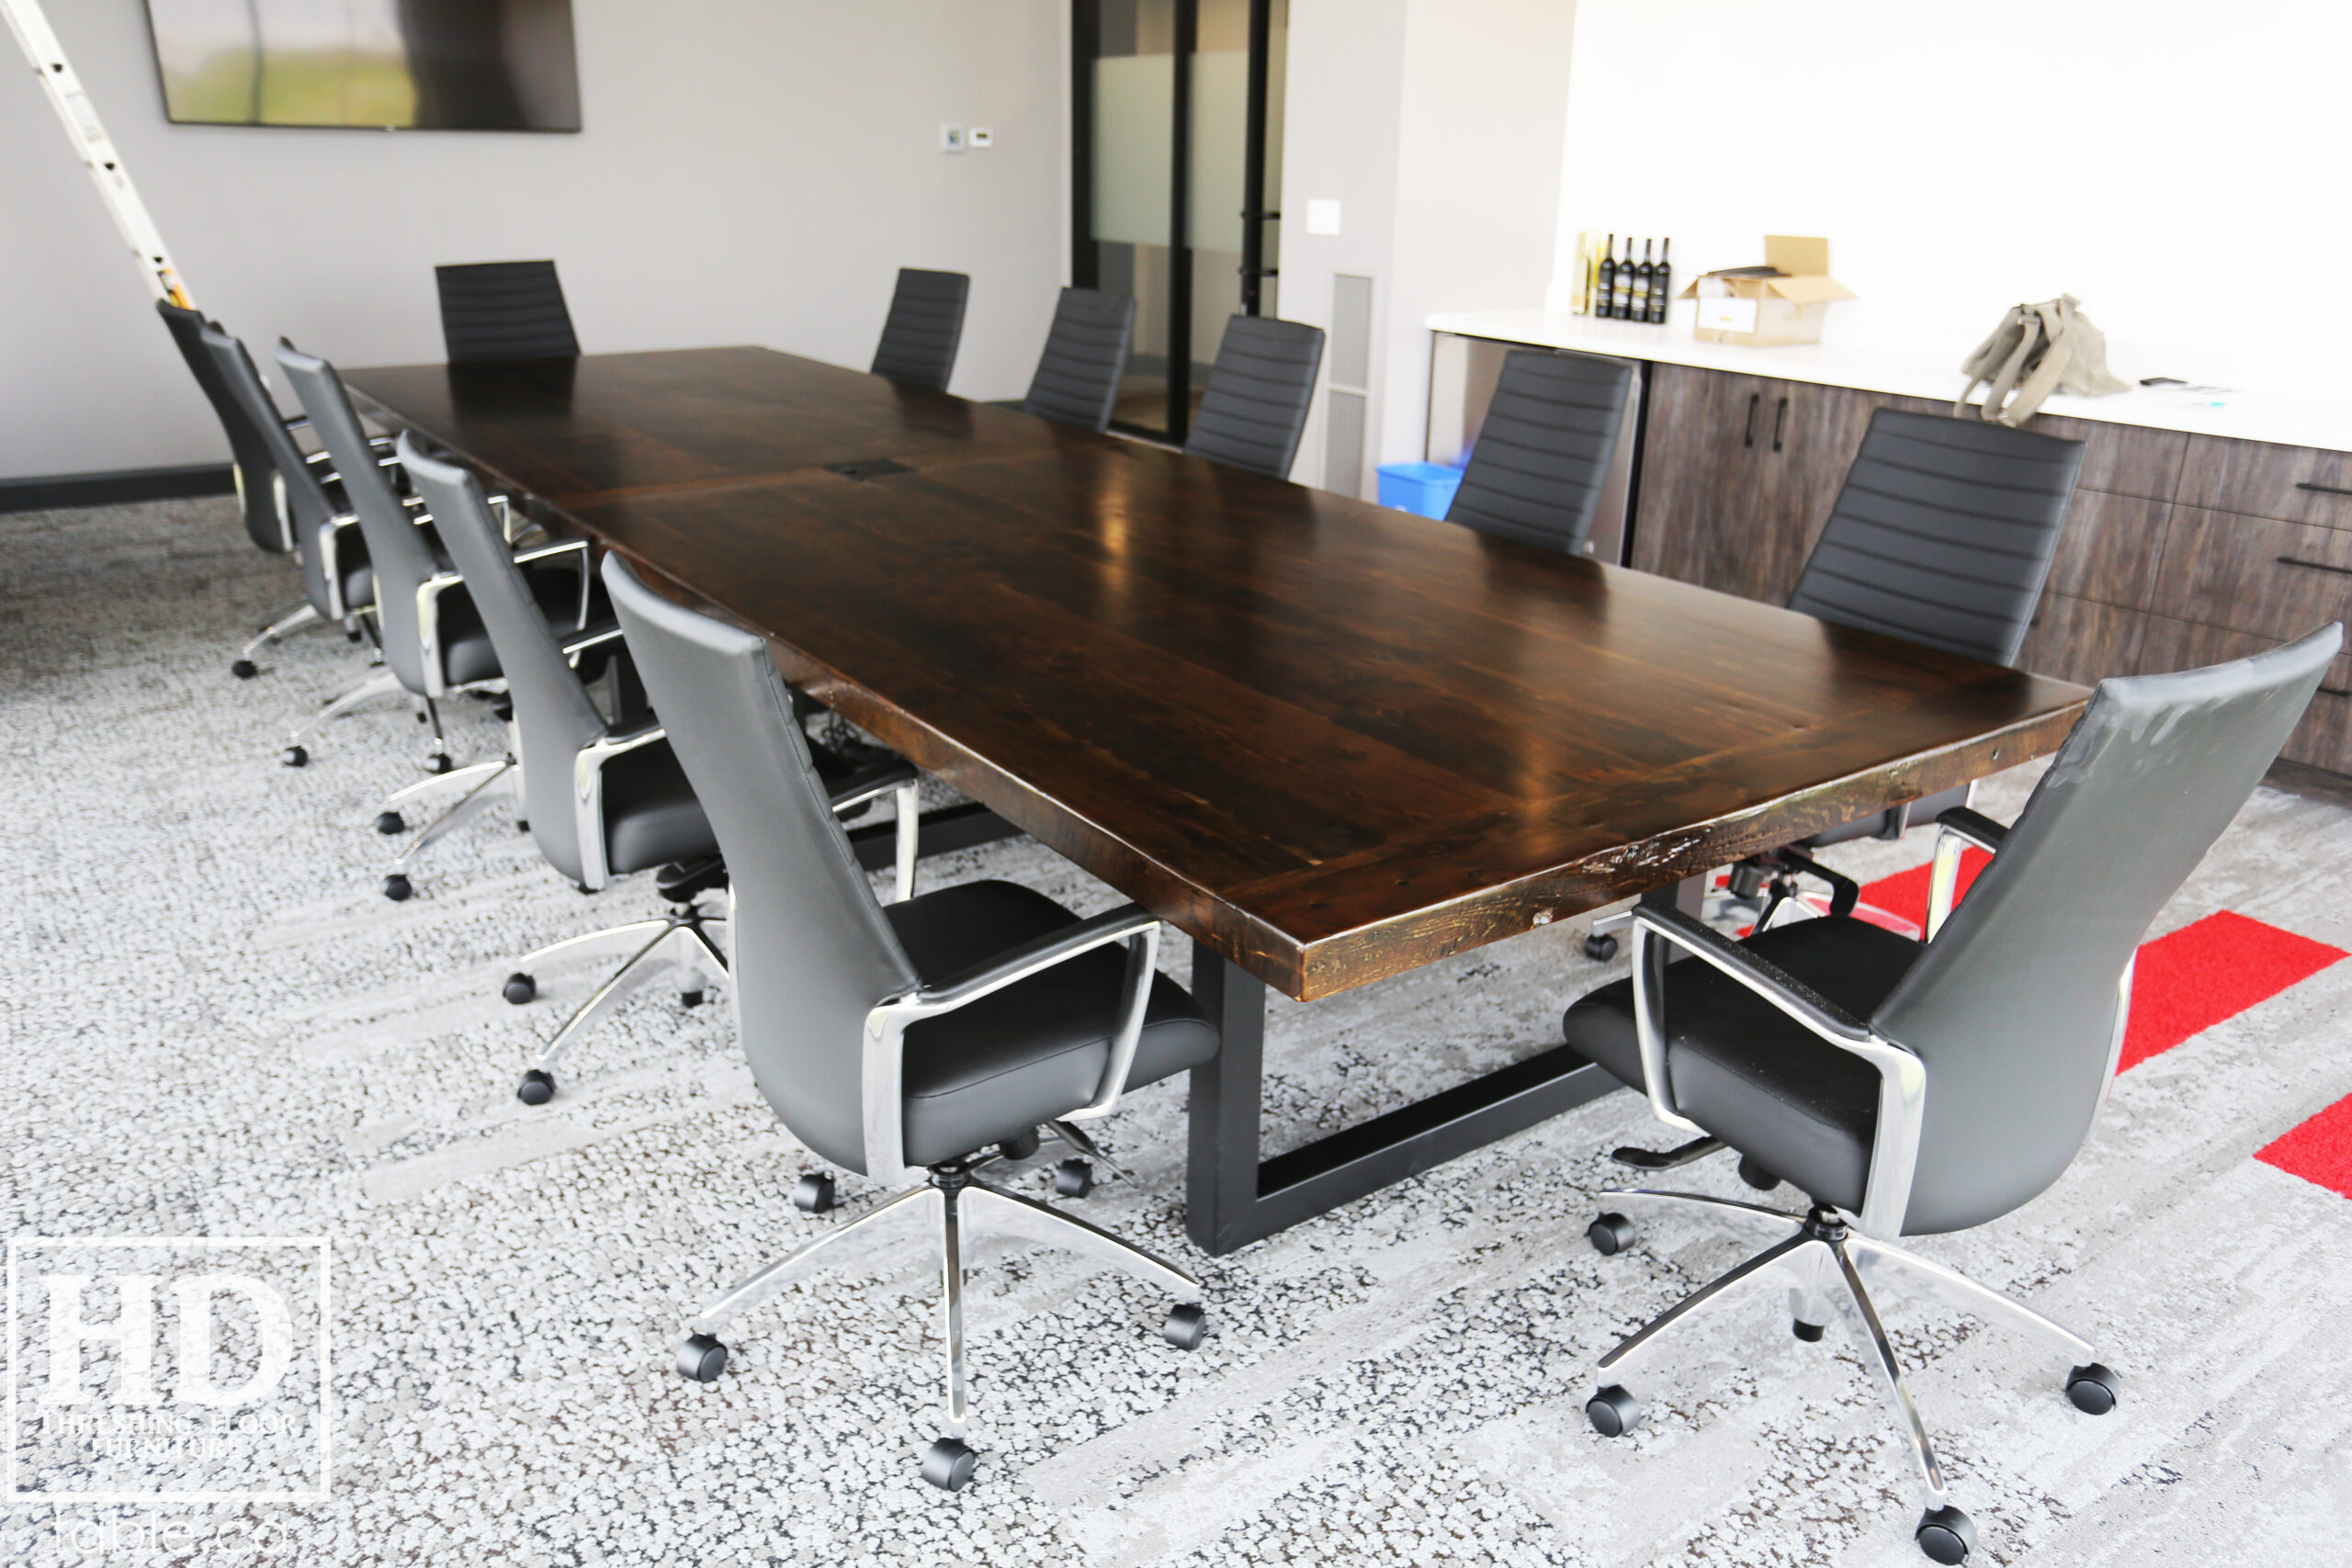 Project details: 17' Ontario Barnwood Boardroom Wood Table we made for a Beamsville, Ontario company - 60" wide â€“ Steel U Shaped Base â€“ Reclaimed Old Growth Hemlock Threshing Floor Construction â€“ Black Stain Option â€“ Centre on-site doweling - Original edges & distressing maintained â€“ Premium epoxy + Satin polyurethane finish  â€“ www.table.ca